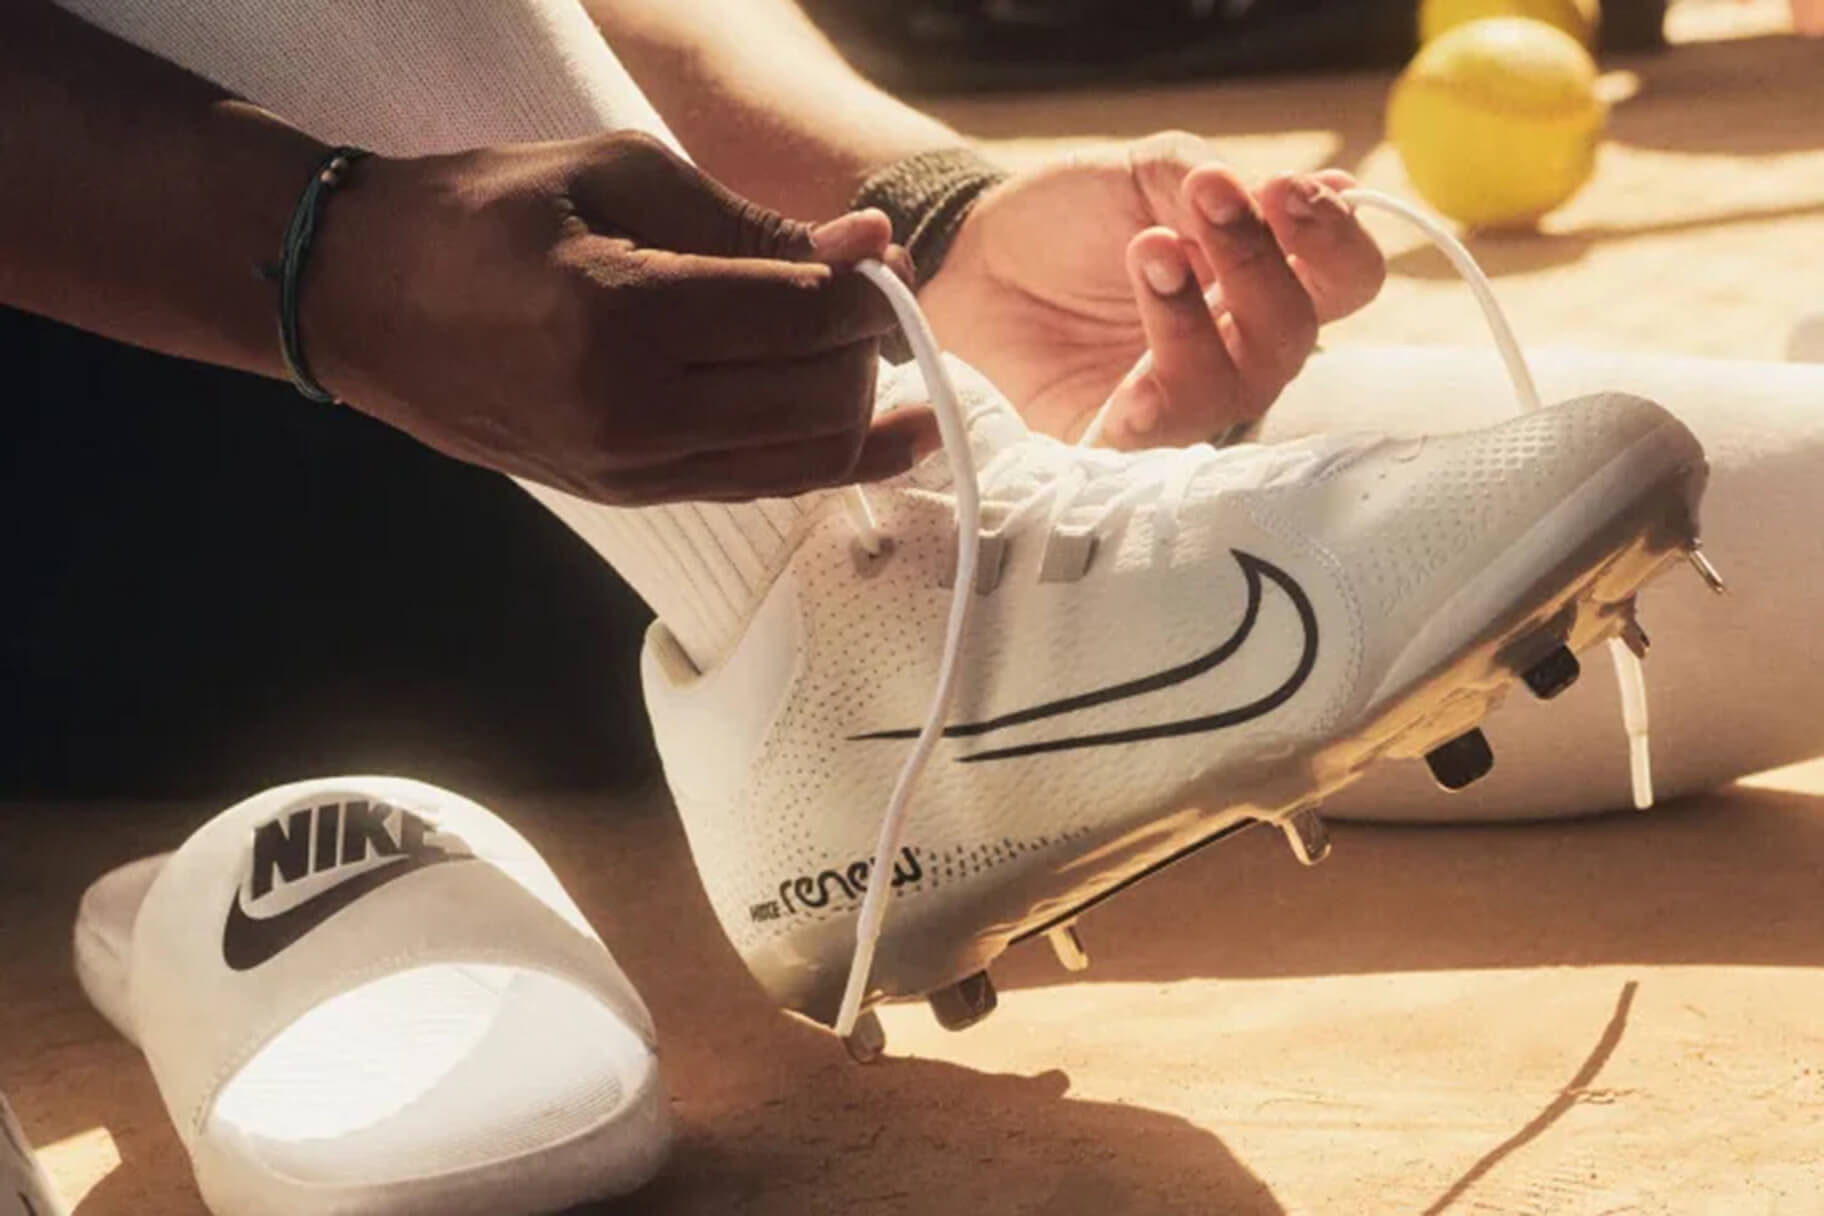 Check Out the Best Softball Cleats by Nike